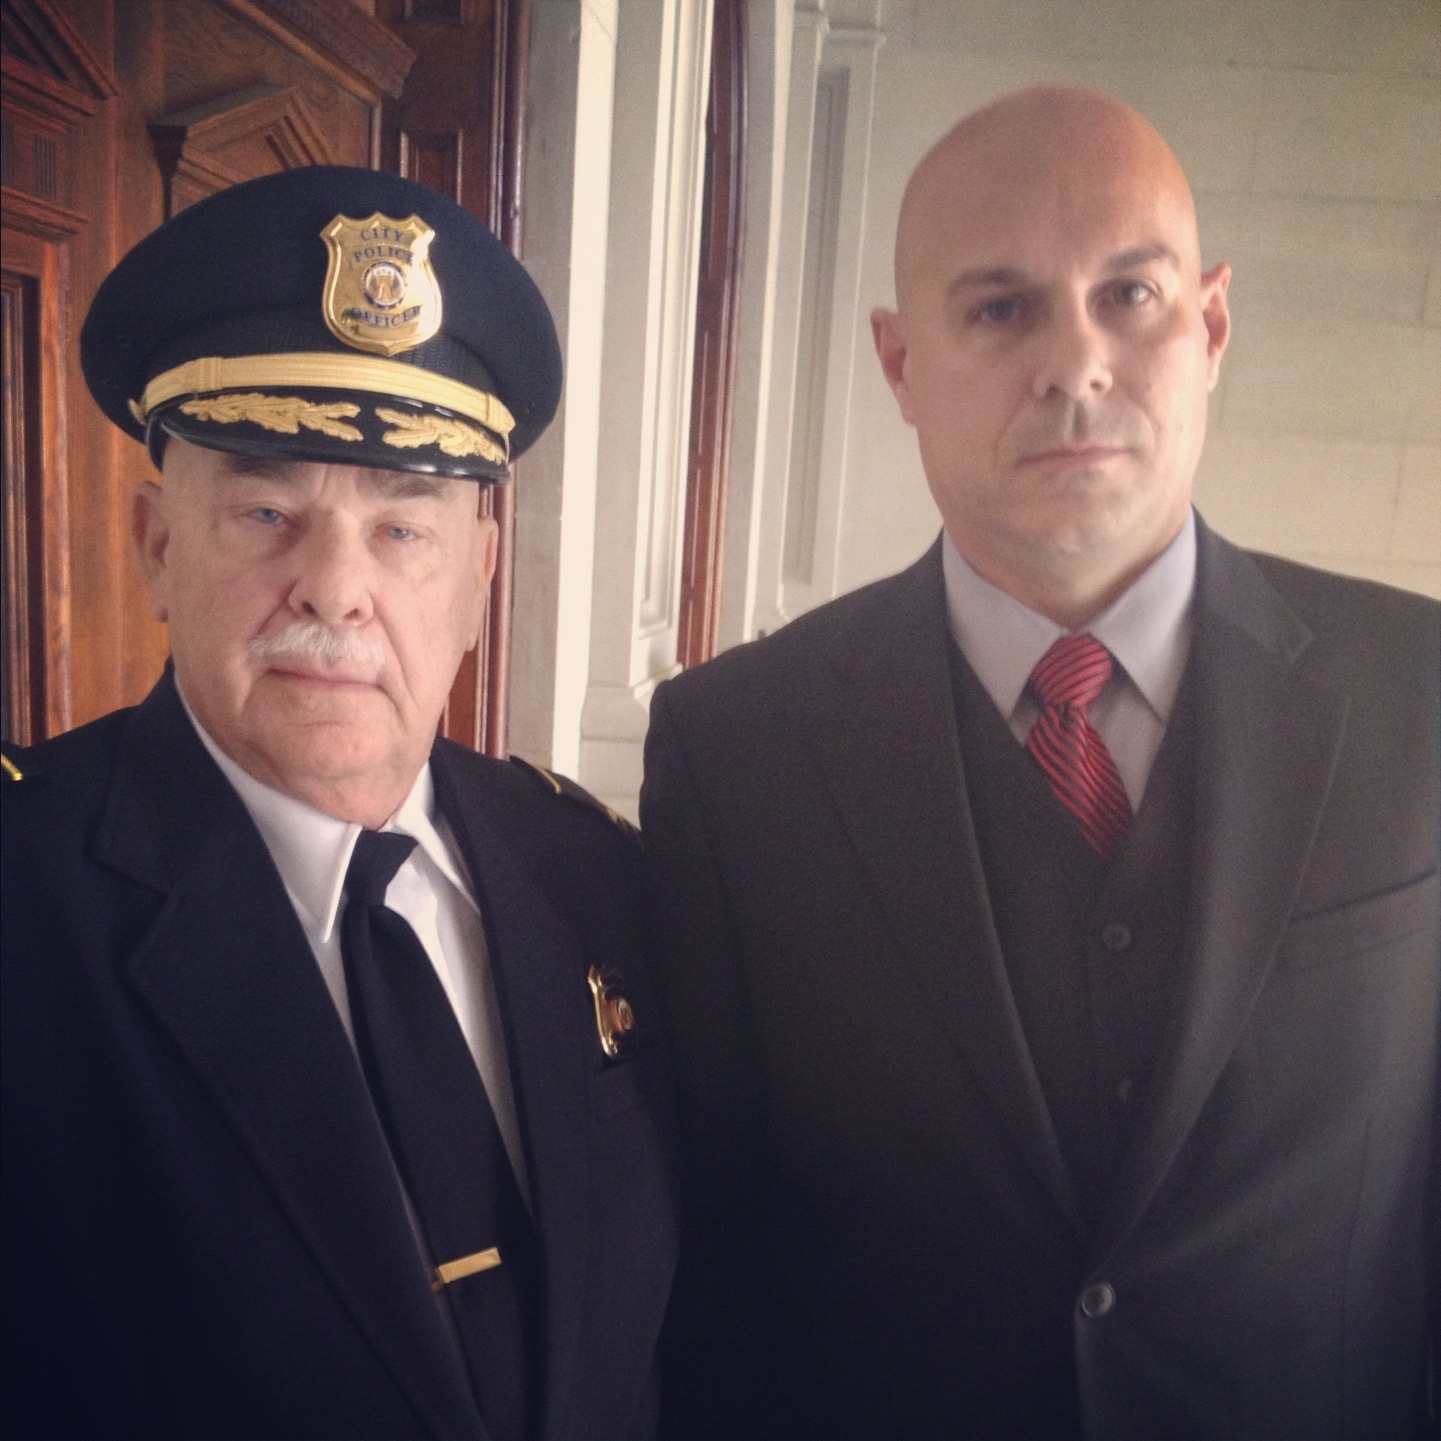 With the Commissioner / Police Executive - Ride Along / Georgia State Capital Building